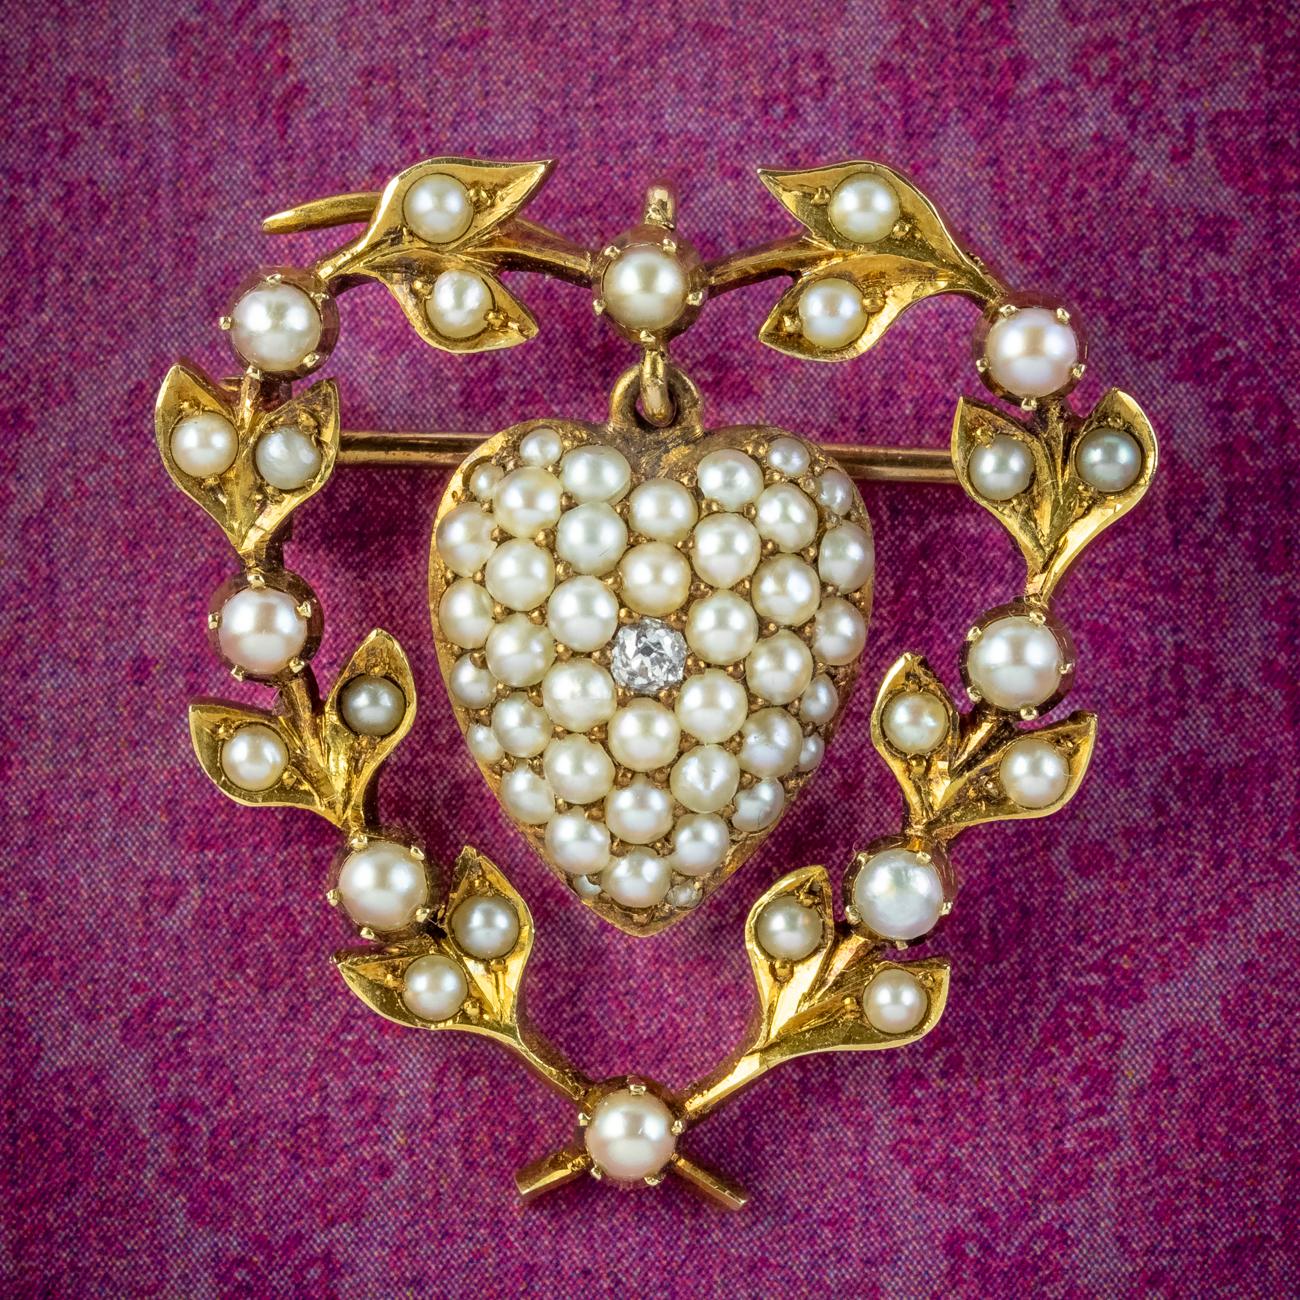 A sweet antique Victorian brooch from the late 19th Century consisting of a heart-shaped wreath decorated with natural seed pearls and a heart suspended in the centre pave set with further seed pearls and a twinkling old mine cut diamond.

Pearls